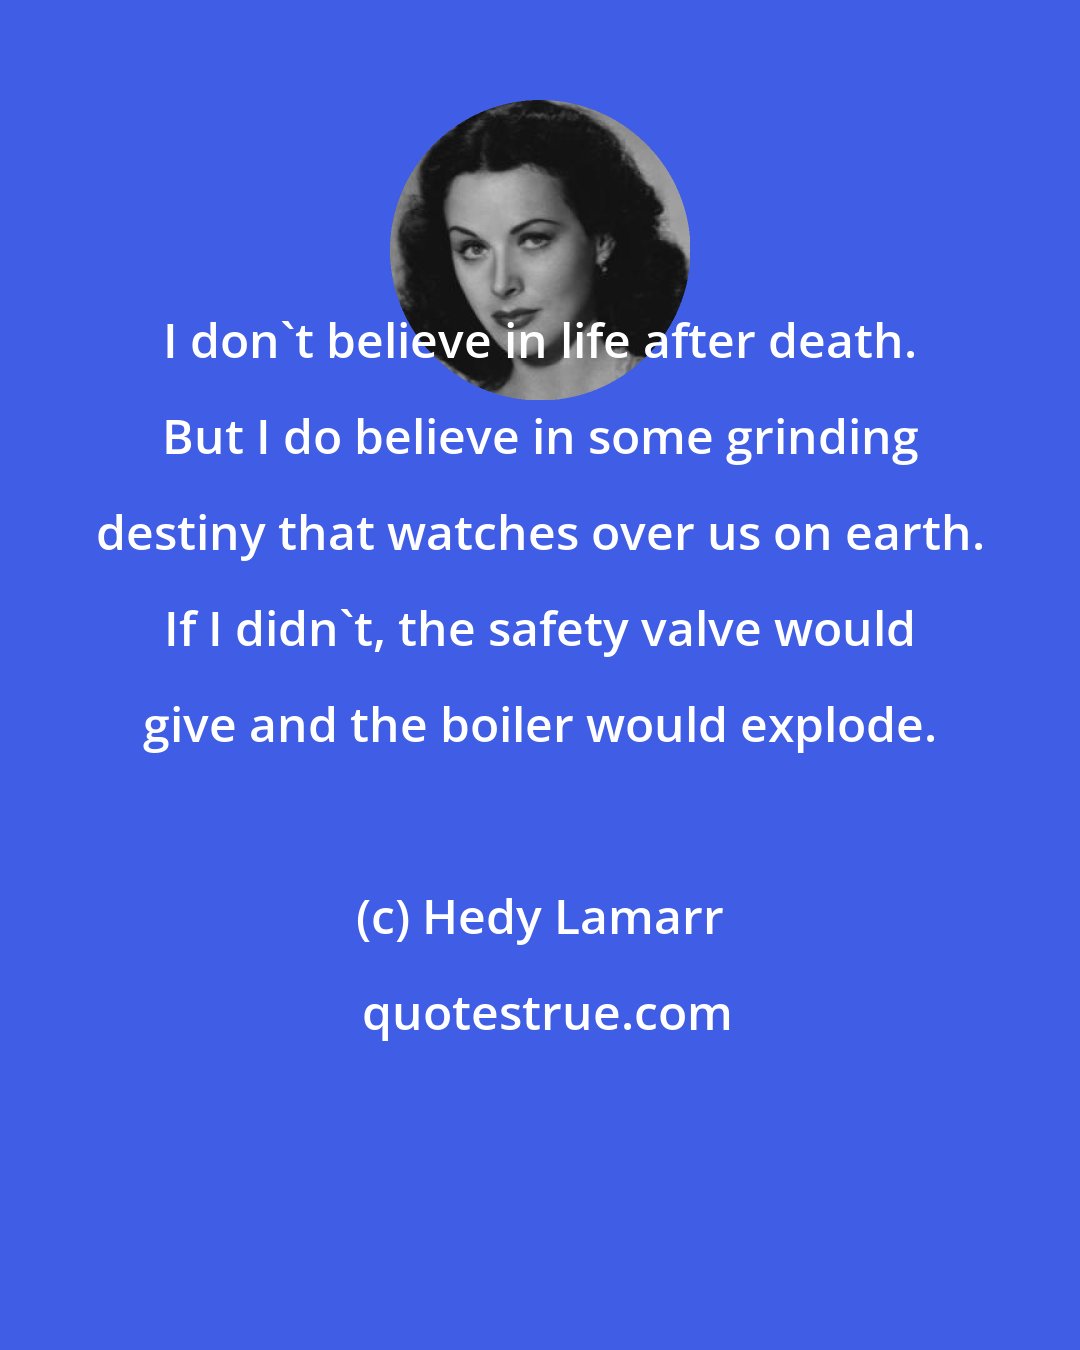 Hedy Lamarr: I don't believe in life after death. But I do believe in some grinding destiny that watches over us on earth. If I didn't, the safety valve would give and the boiler would explode.